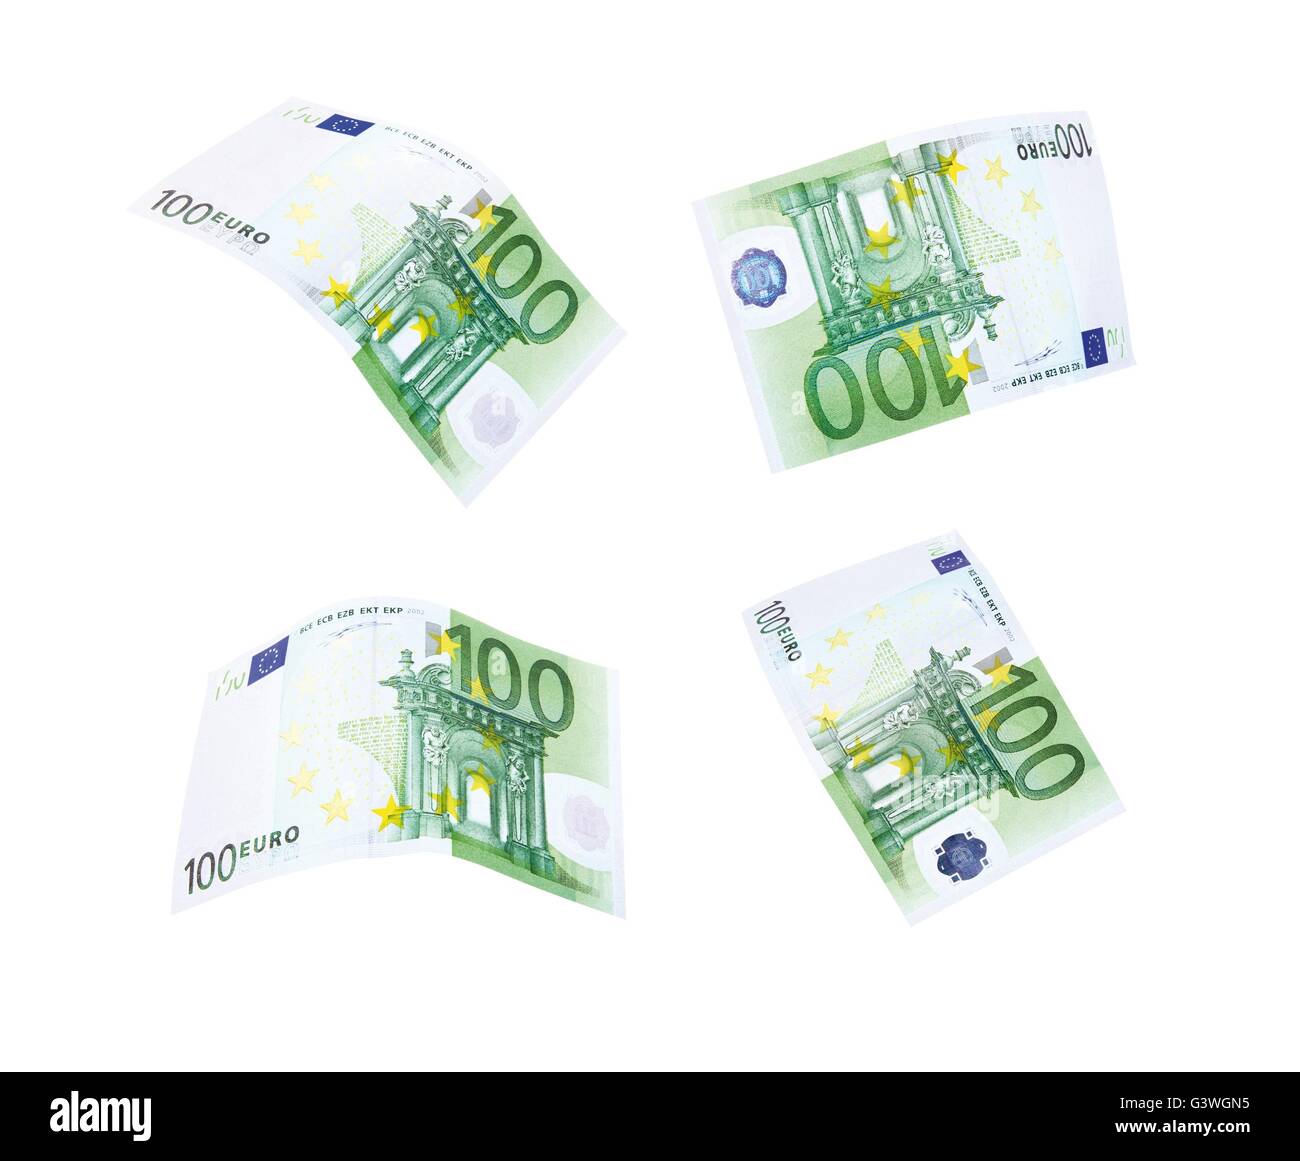 Flying 100 banknotes of euros isolated on white Stock Photo